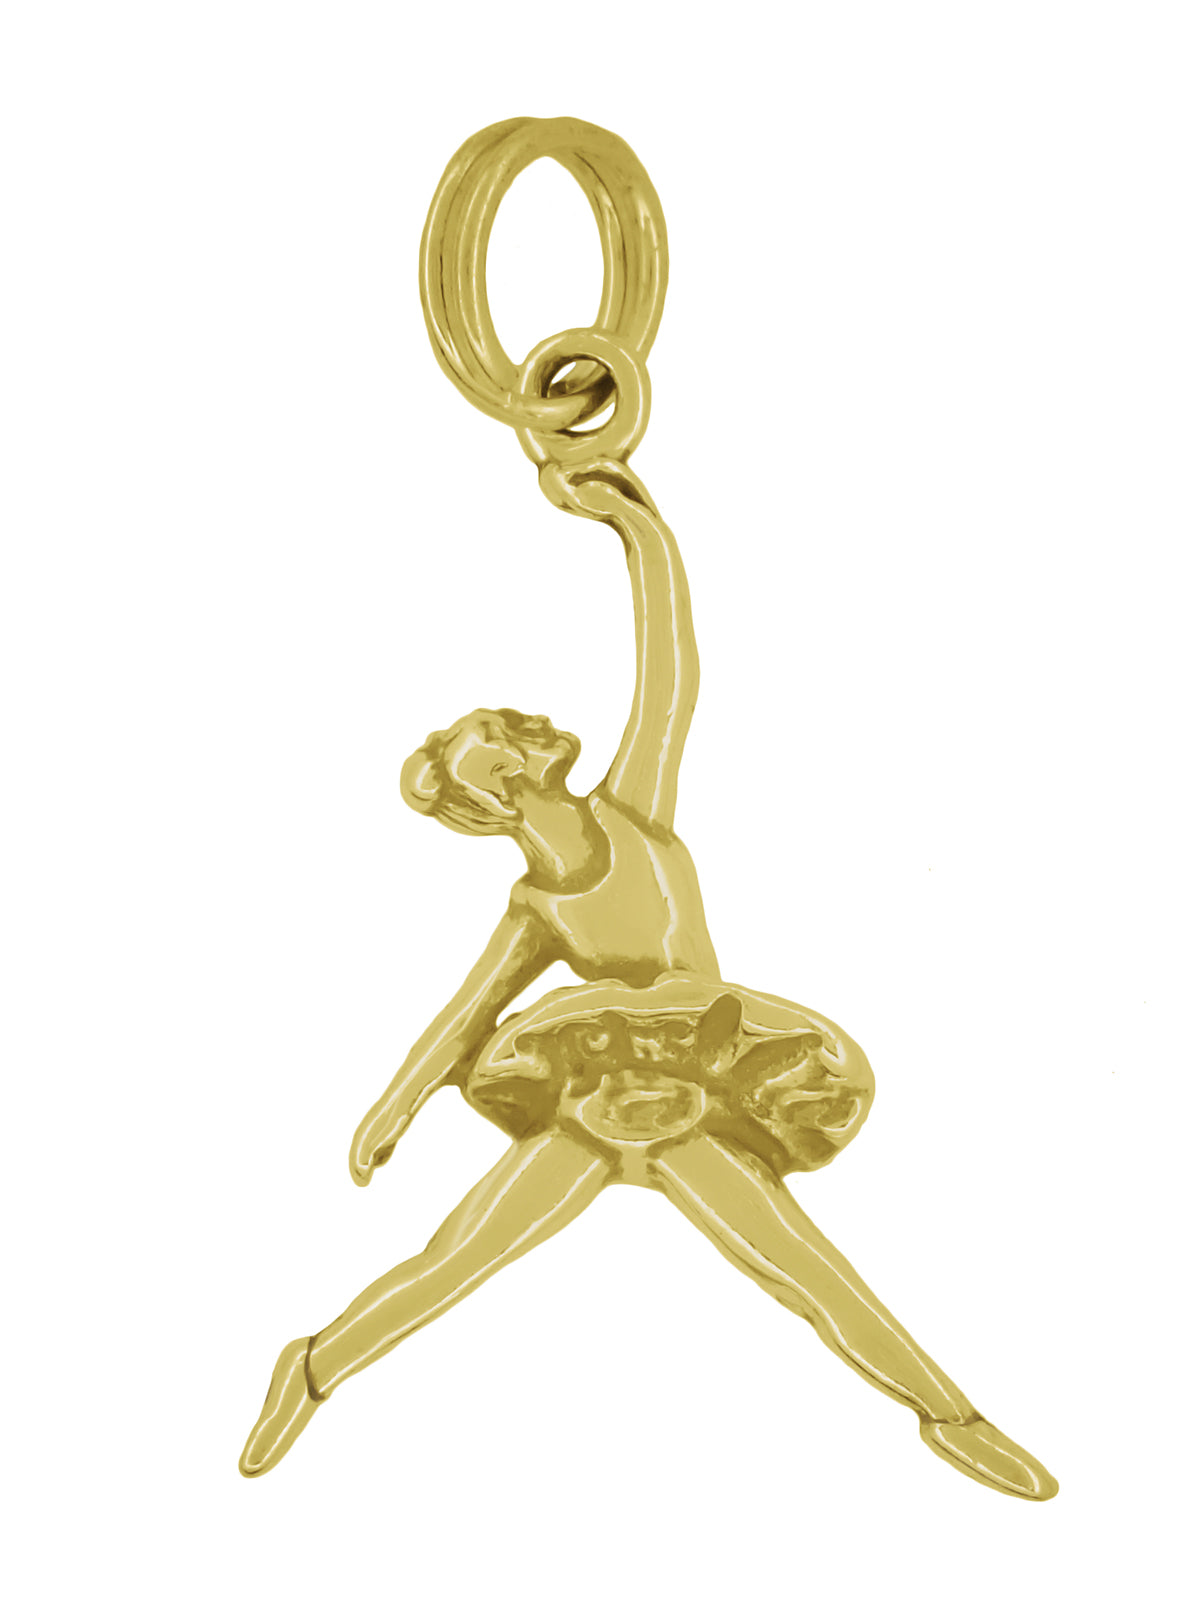 Ballet Positions  Pendant Charm in Solid Yellow Gold - Arabesque Ballerina Jewelry - C462